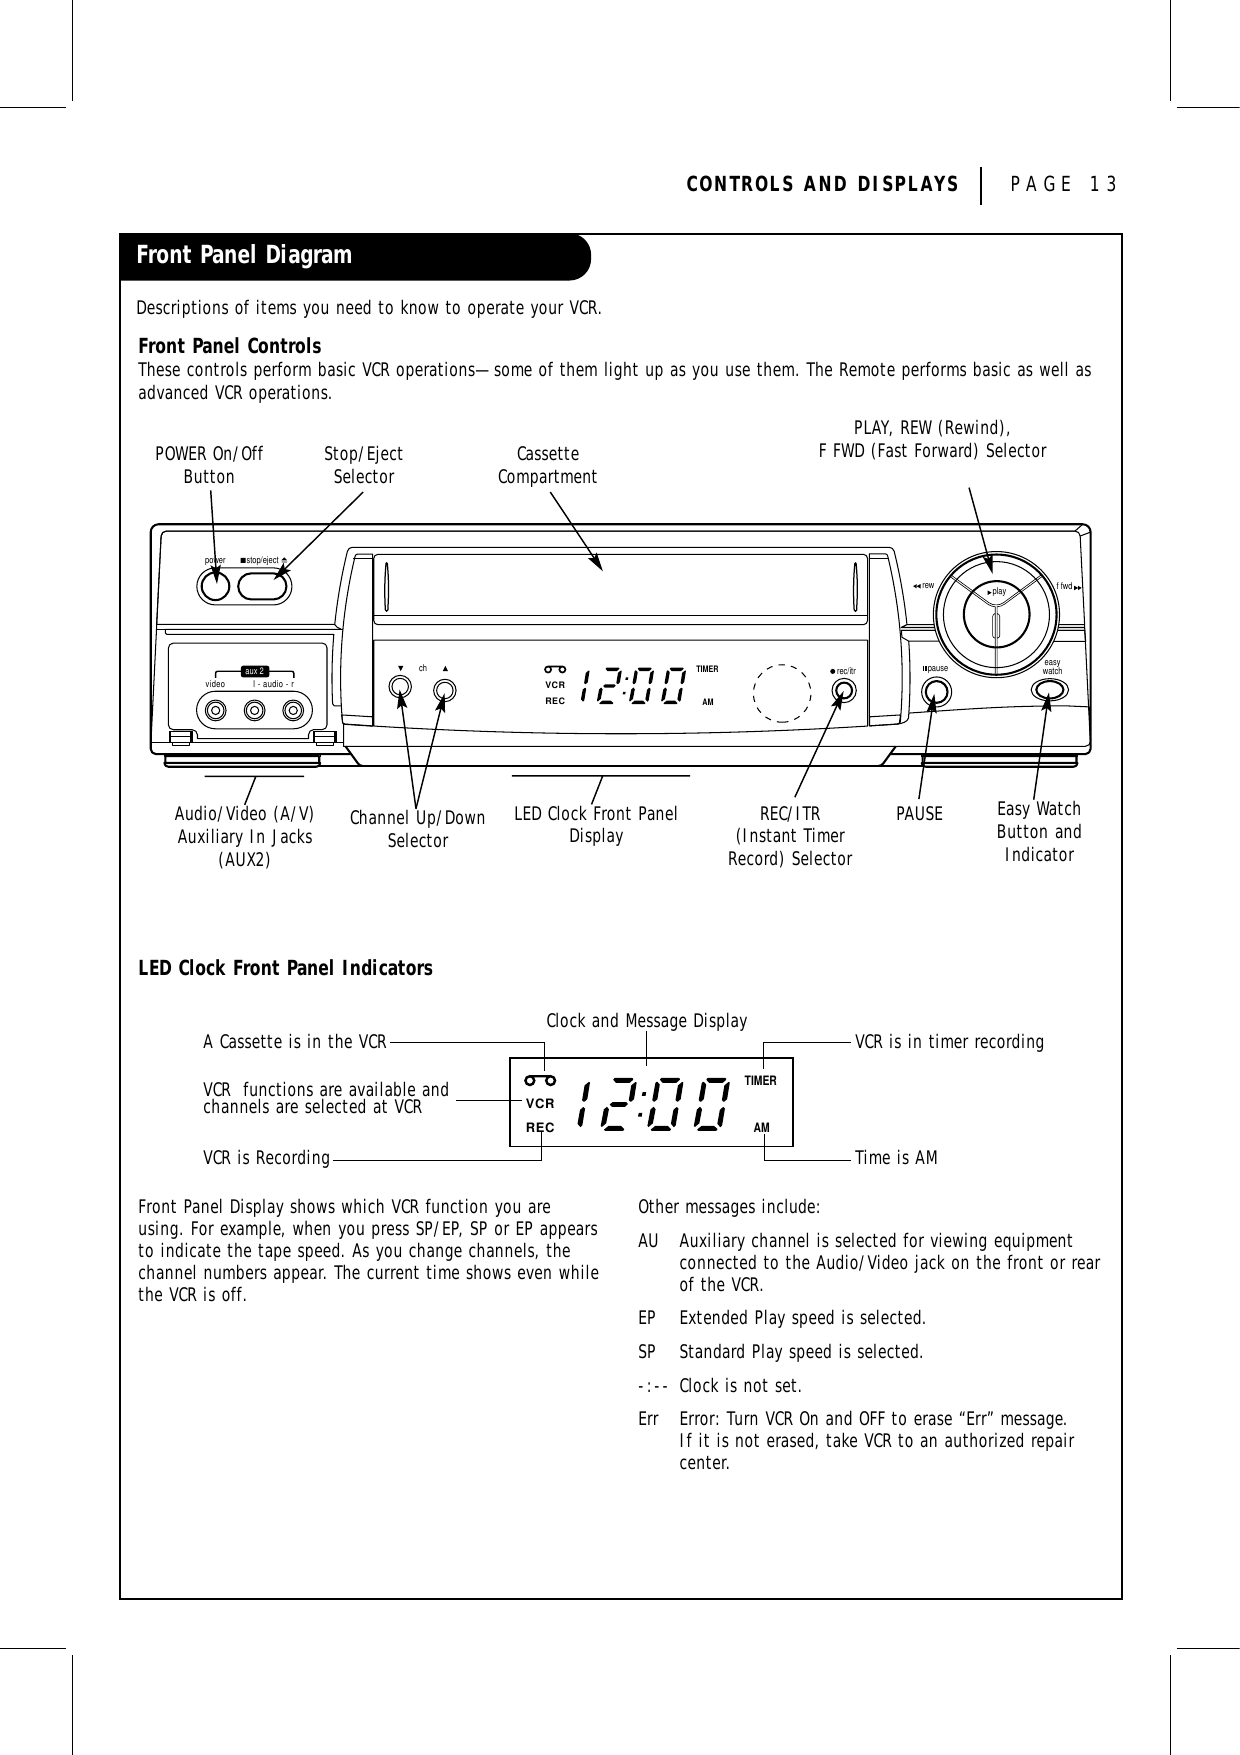 CONTROLS AND DISPLAYS PAGE 13Front Panel DiagramDescriptions of items you need to know to operate your VCR.Front Panel ControlsThese controls perform basic VCR operations—some of them light up as you use them. The Remote performs basic as well asadvanced VCR operations.easywatchpauserec/itrchvideo l - audio - rstop/ejectpoweraux 2playrew f fwdVCRRECTIMERAMzenithLED Clock Front Panel IndicatorsVCRRECTIMERAMPOWER On/OffButton CassetteCompartmentChannel Up/DownSelectorStop/EjectSelectorPLAY, REW (Rewind),F FWD (Fast Forward) SelectorLED Clock Front PanelDisplay Easy WatchButton andIndicatorREC/ITR(Instant TimerRecord) SelectorPAUSEA Cassette is in the VCRVCR is RecordingClock and Message Display VCR is in timer recordingTime is AMVCR  functions are available andchannels are selected at VCRFront Panel Display shows which VCR function you areusing. For example, when you press SP/EP, SP or EP appearsto indicate the tape speed. As you change channels, thechannel numbers appear. The current time shows even whilethe VCR is off.Other messages include:AU  Auxiliary channel is selected for viewing equipmentconnected to the Audio/Video jack on the front or rearof the VCR.EP Extended Play speed is selected.SP Standard Play speed is selected.-:-- Clock is not set.Err Error: Turn VCR On and OFF to erase “Err” message.  If it is not erased, take VCR to an authorized repaircenter.Audio/Video (A/V)Auxiliary In Jacks(AUX2)